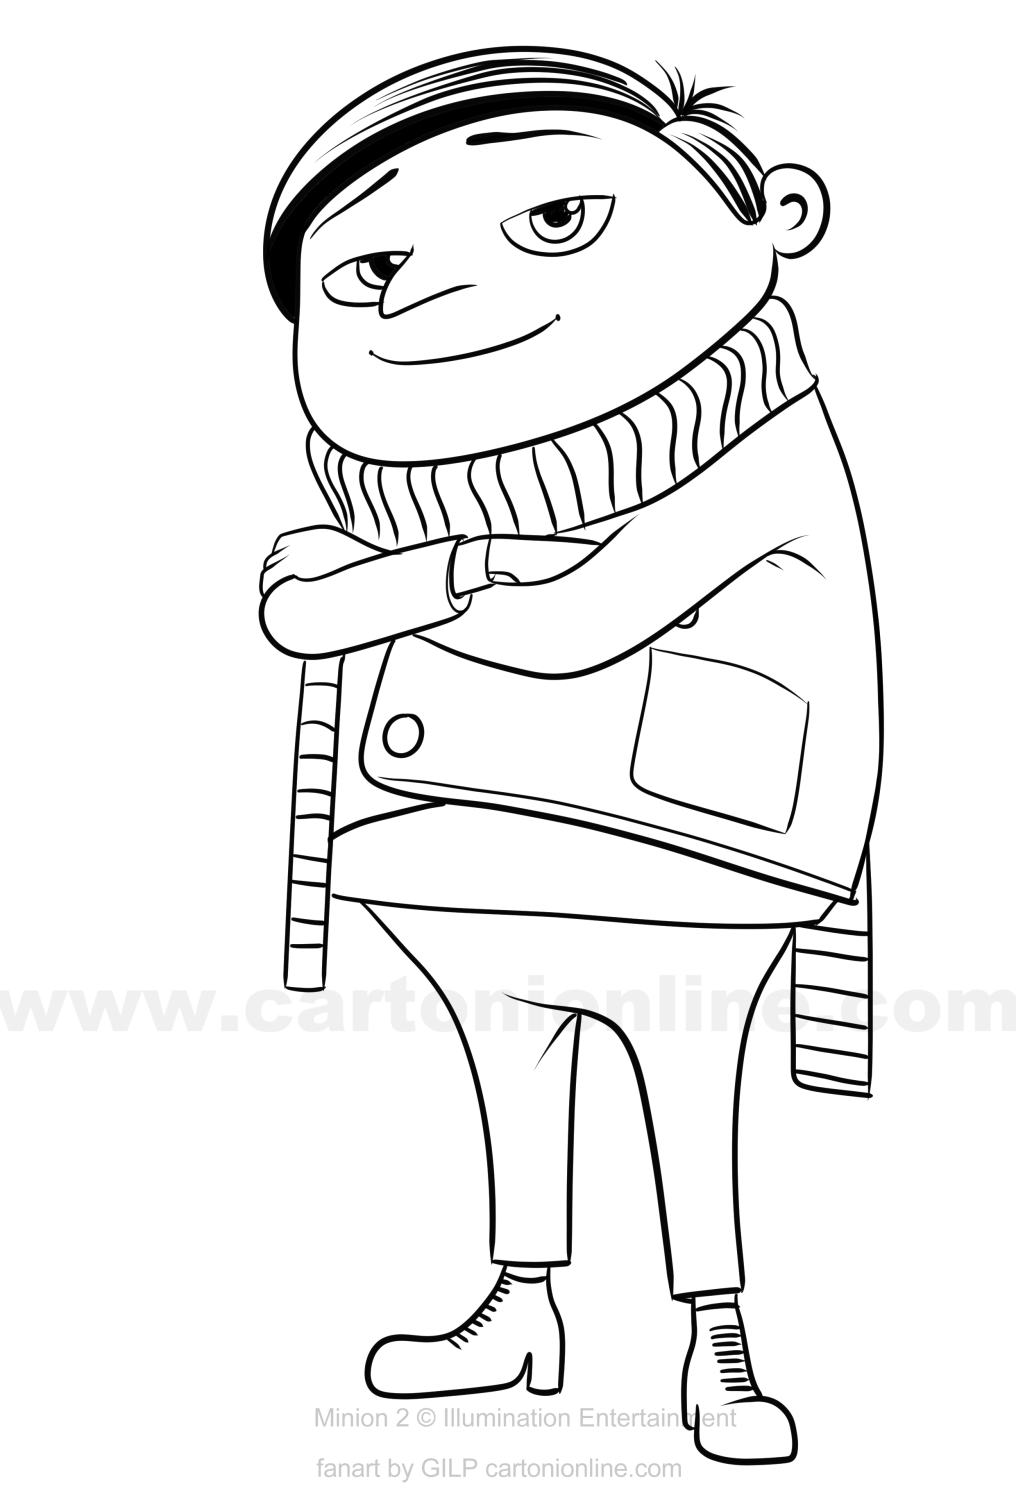 Minions the rise of gru coloring page